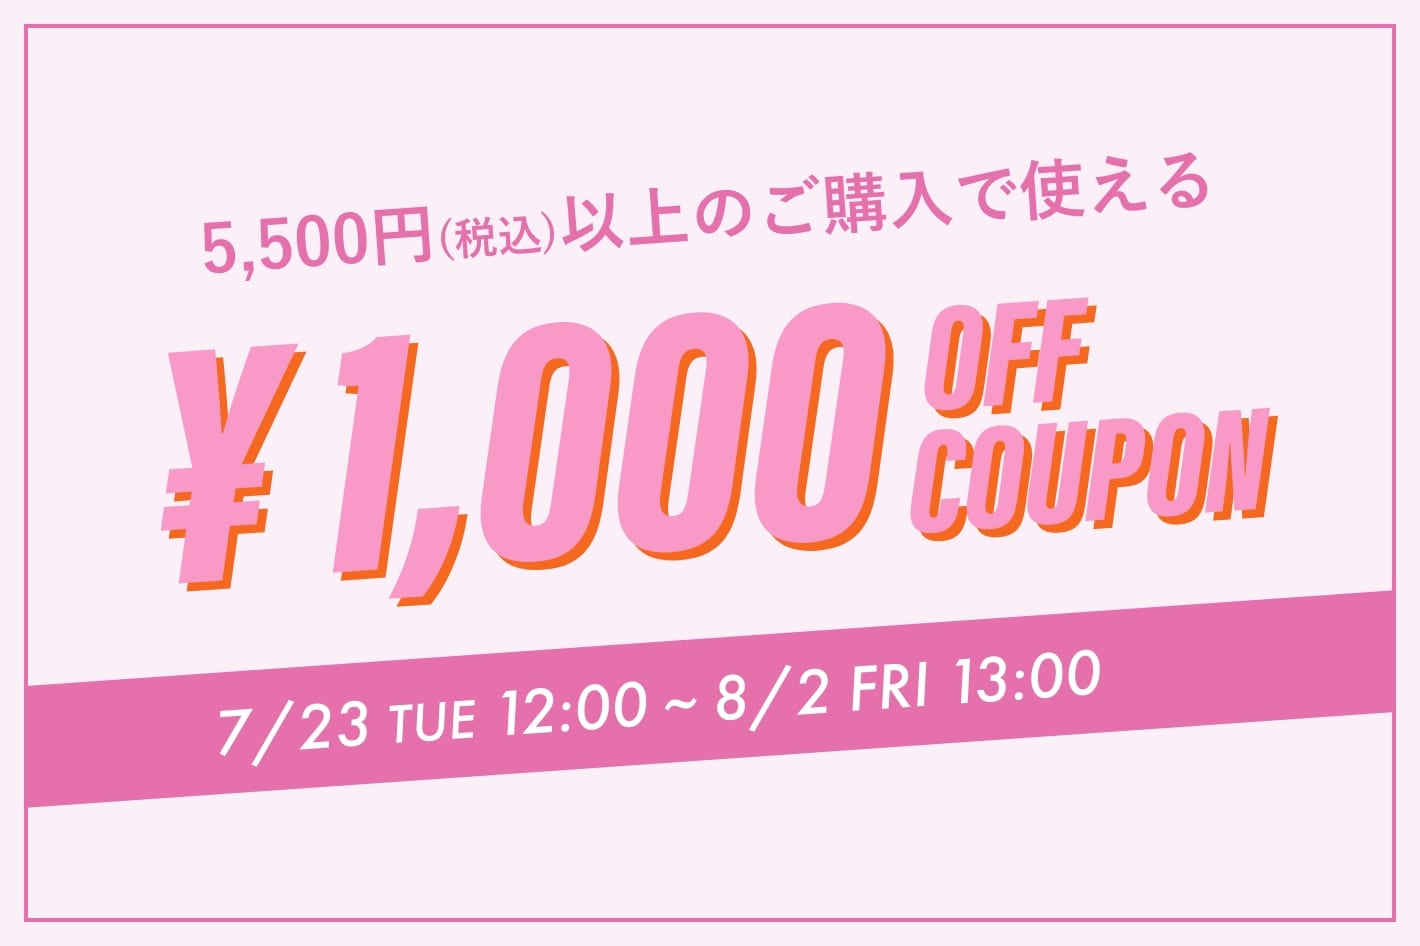 OUTLET 【PALGROUP OUTLET限定】1,000円OFFクーポンキャンペーン開催！